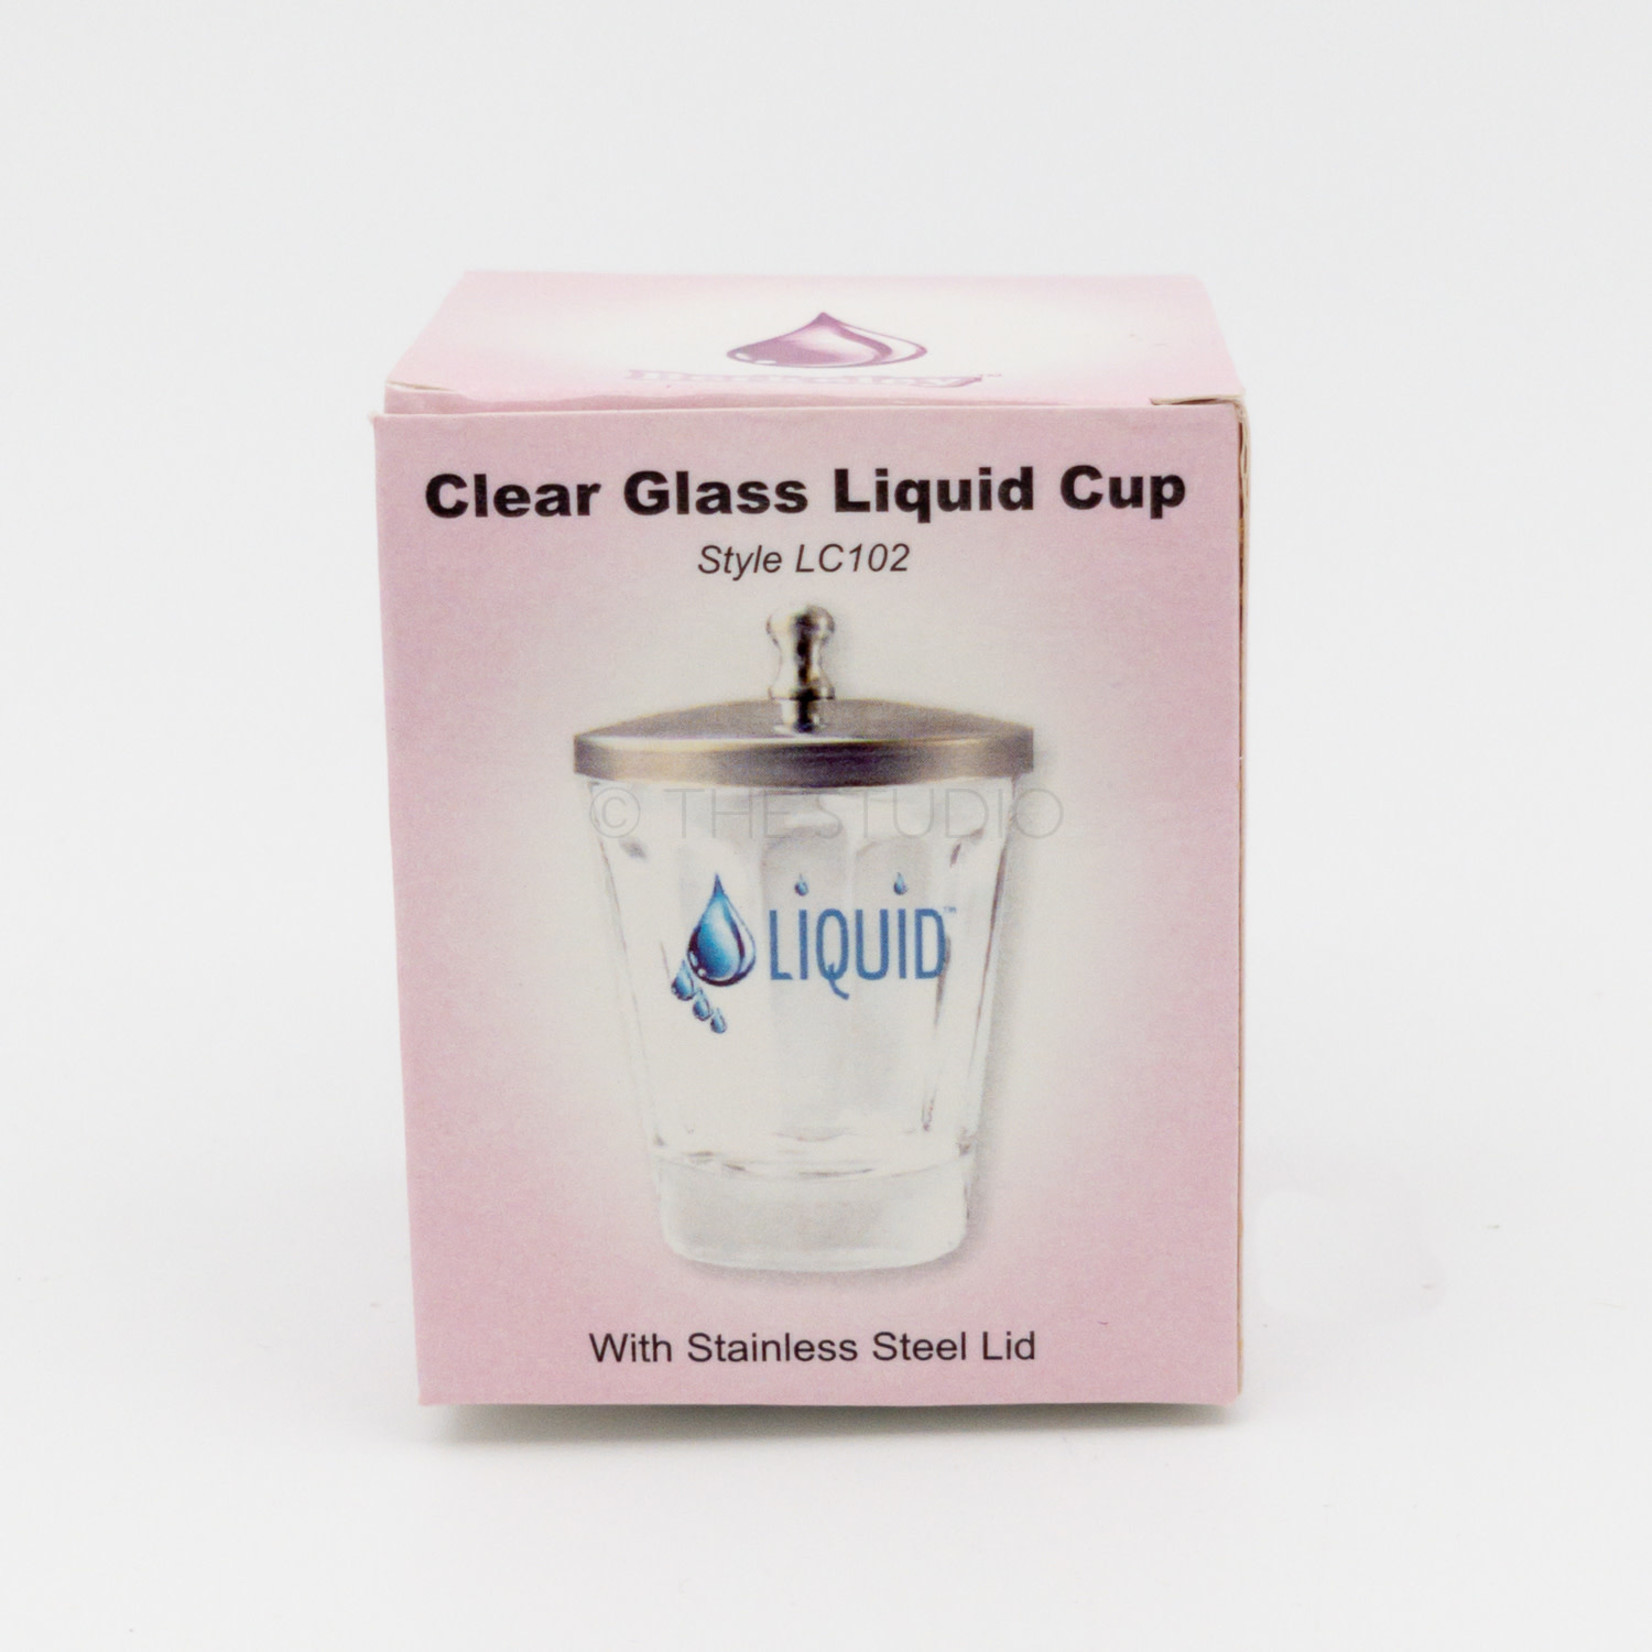 Berkeley - Glass - Liquid Cup With Stainless Steel Lid - Clear - LC102